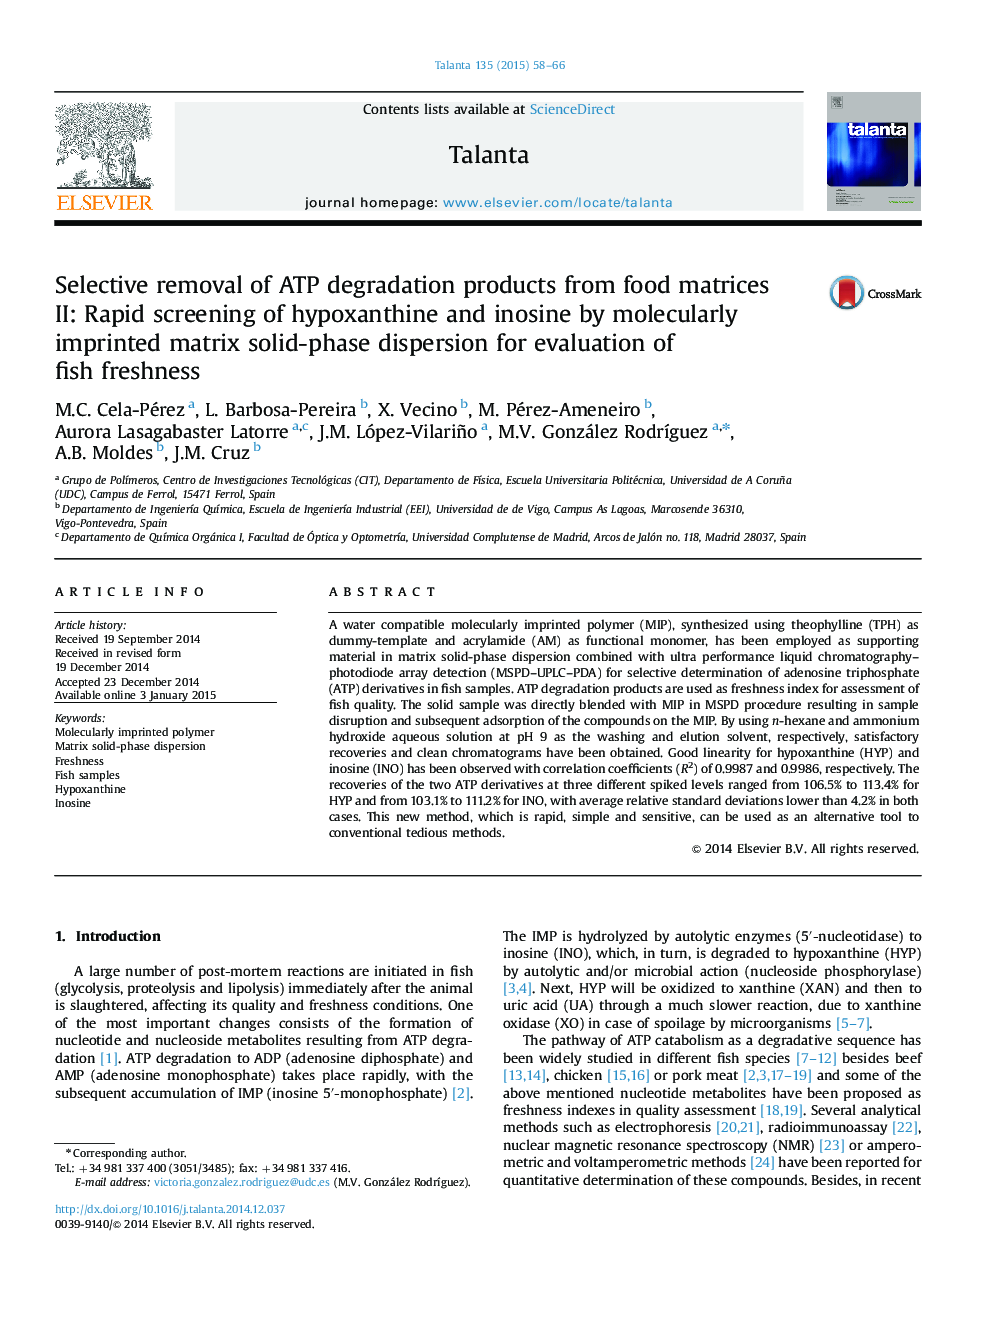 Selective removal of ATP degradation products from food matrices II: Rapid screening of hypoxanthine and inosine by molecularly imprinted matrix solid-phase dispersion for evaluation of fish freshness